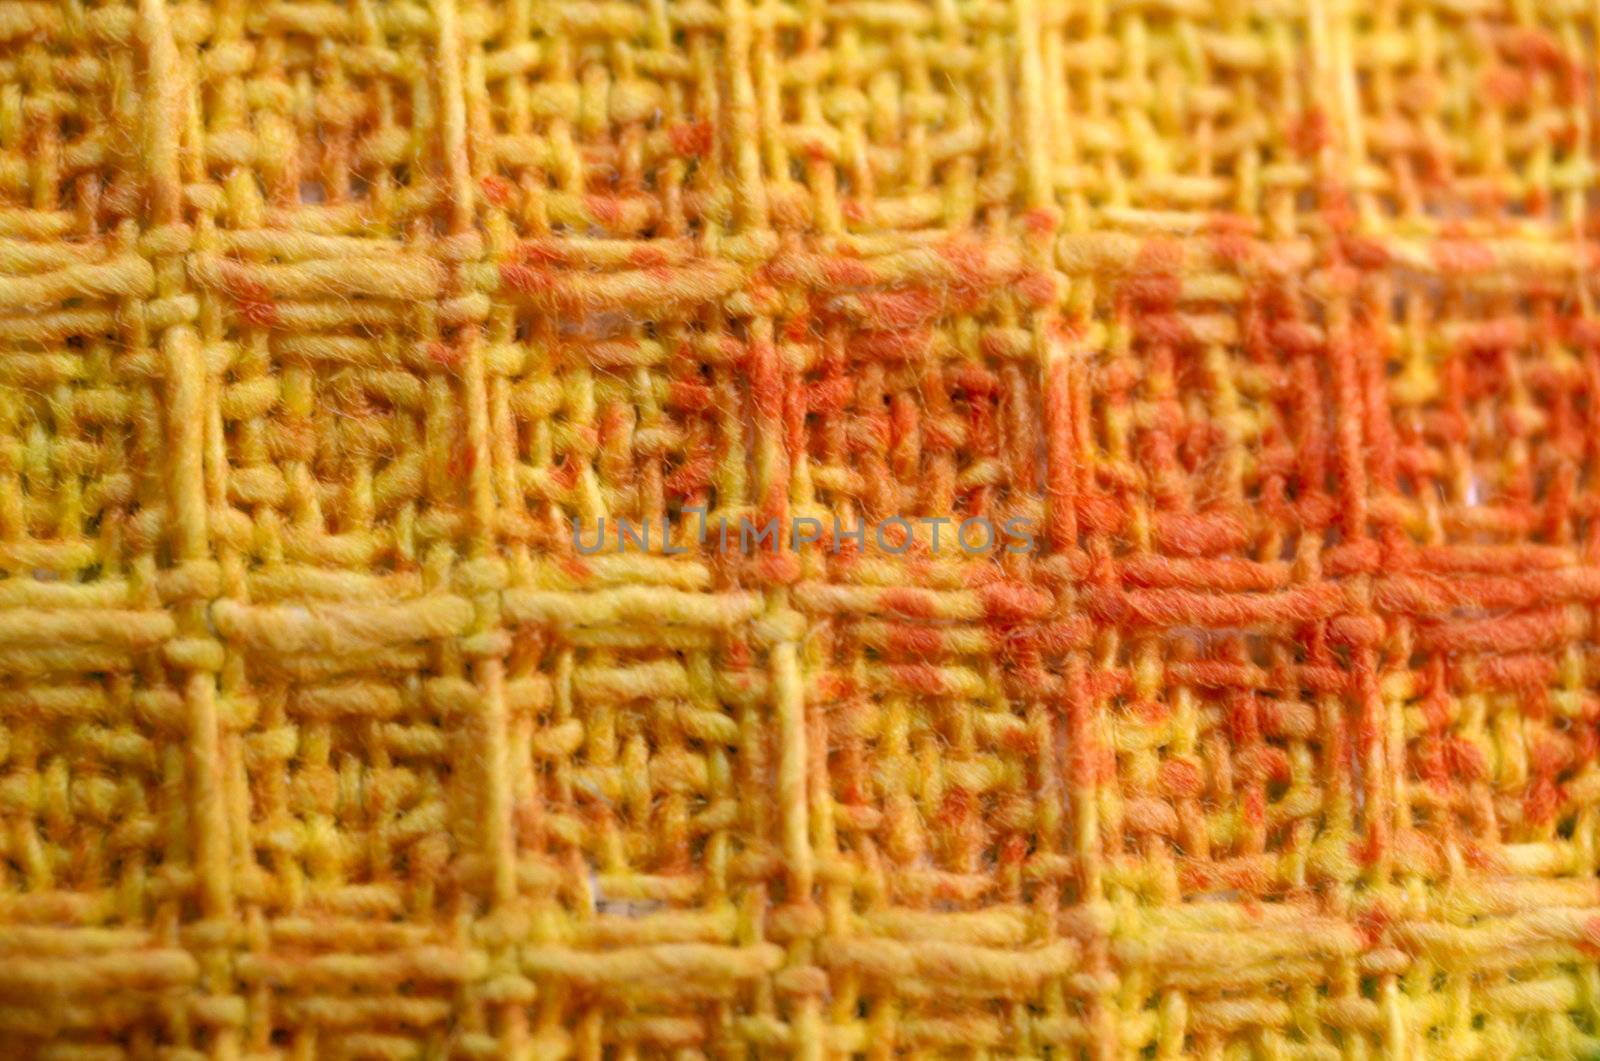 macro pattern of colorful ( yellow, orange, red ) textile fabric